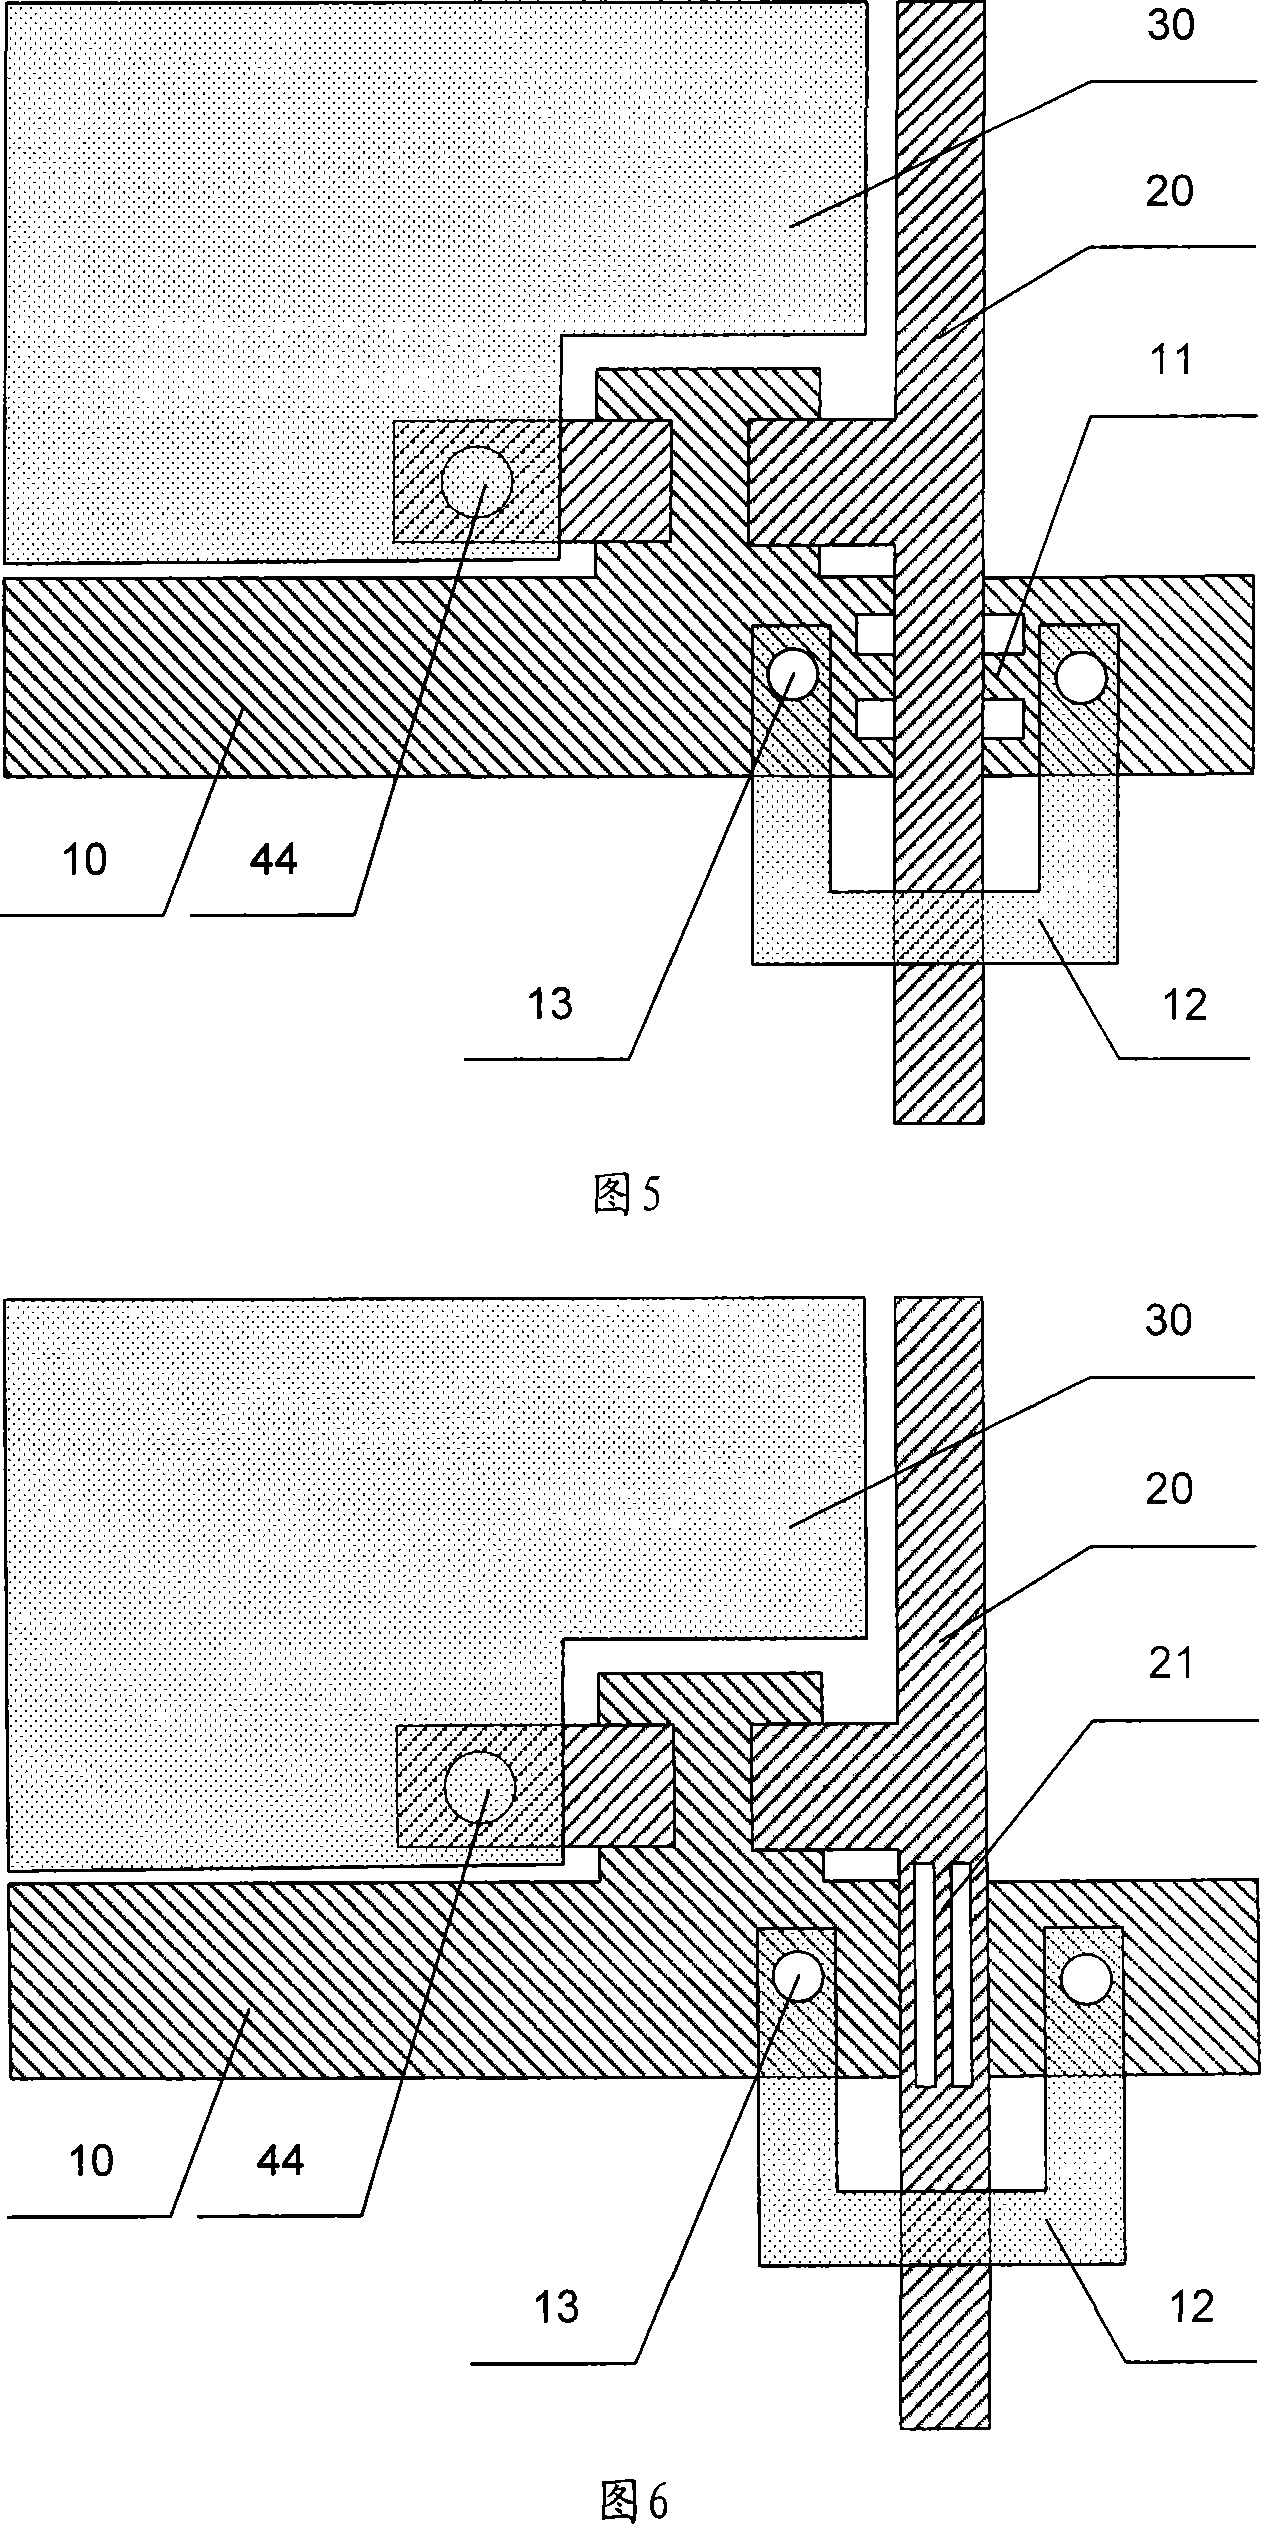 TFT-LCD array substrate